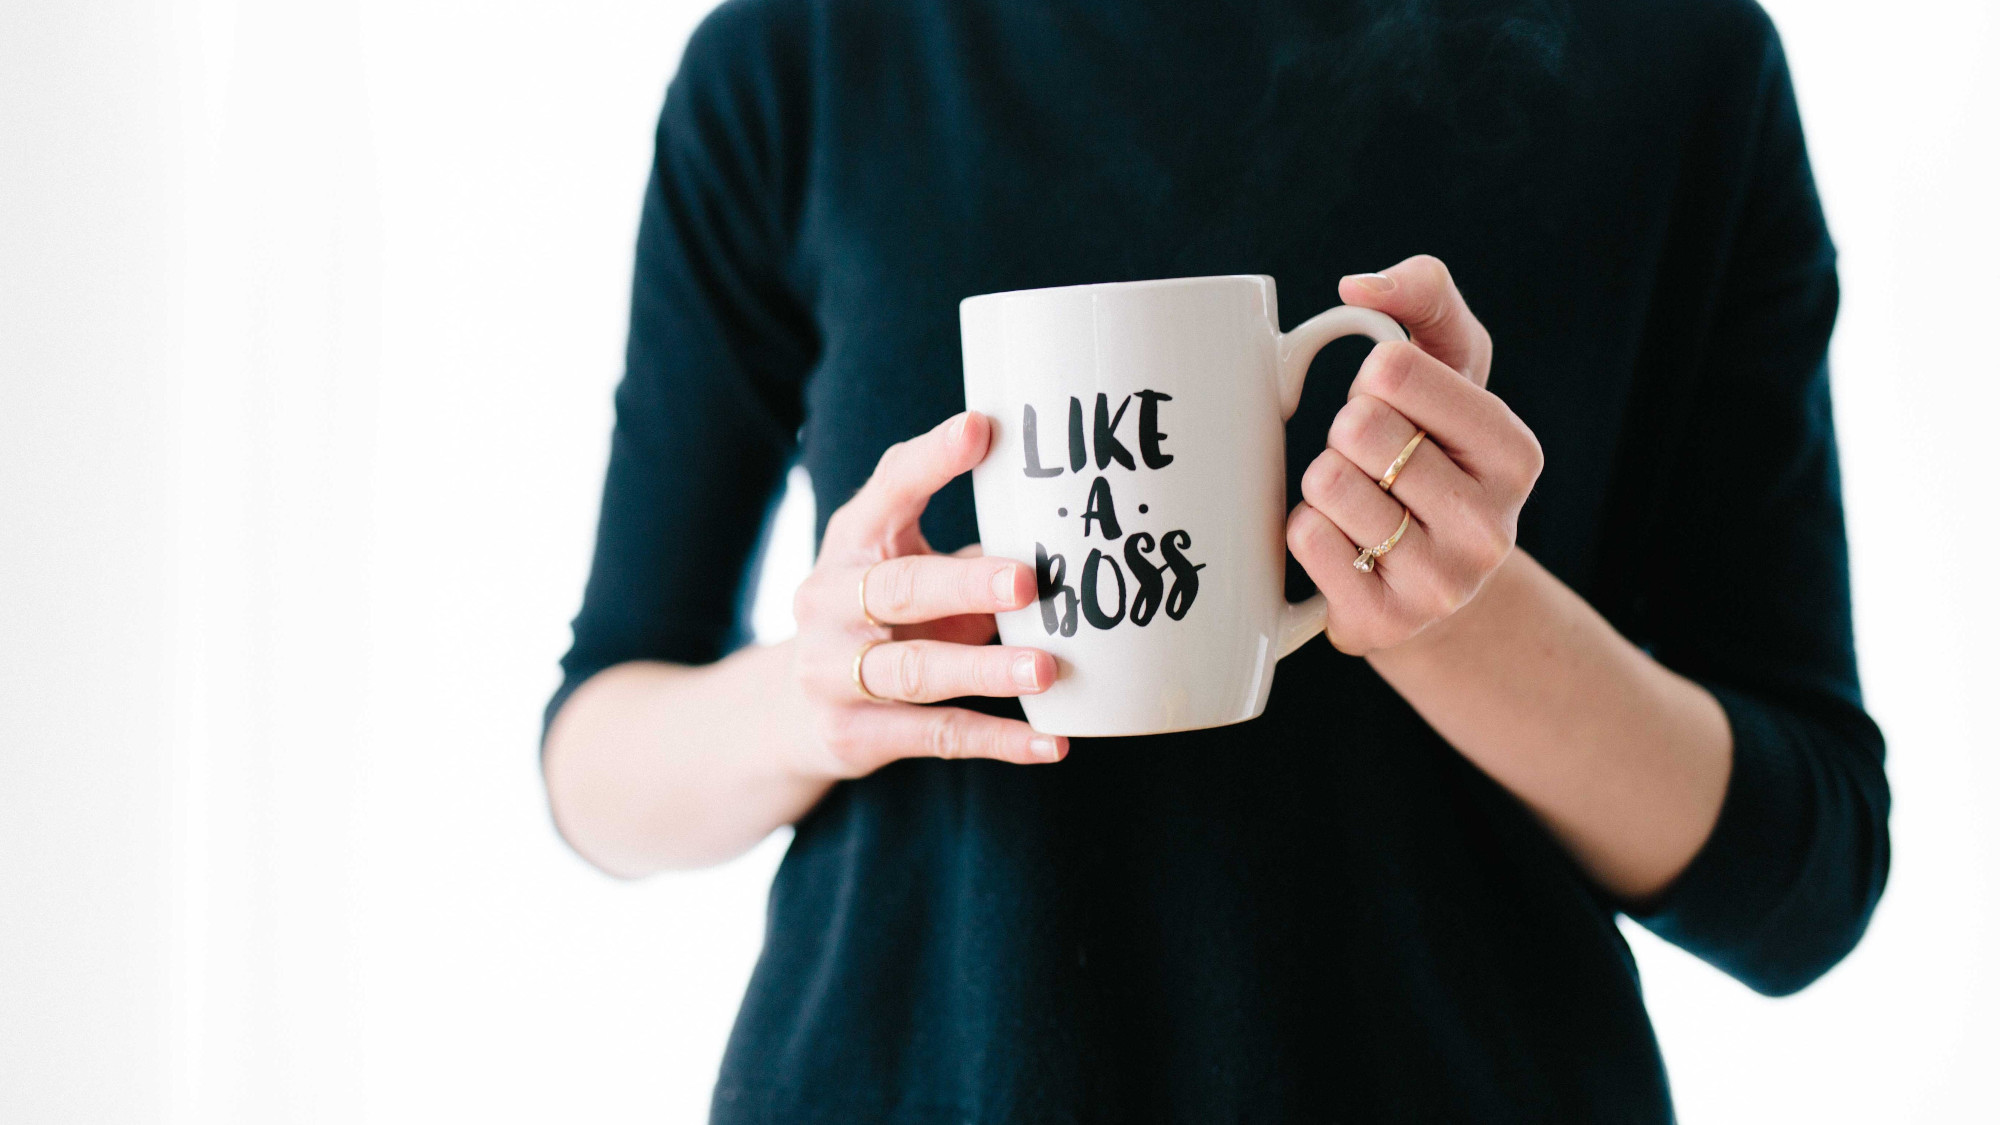 Woman holding a coffee mug which quotes "Like a boss"